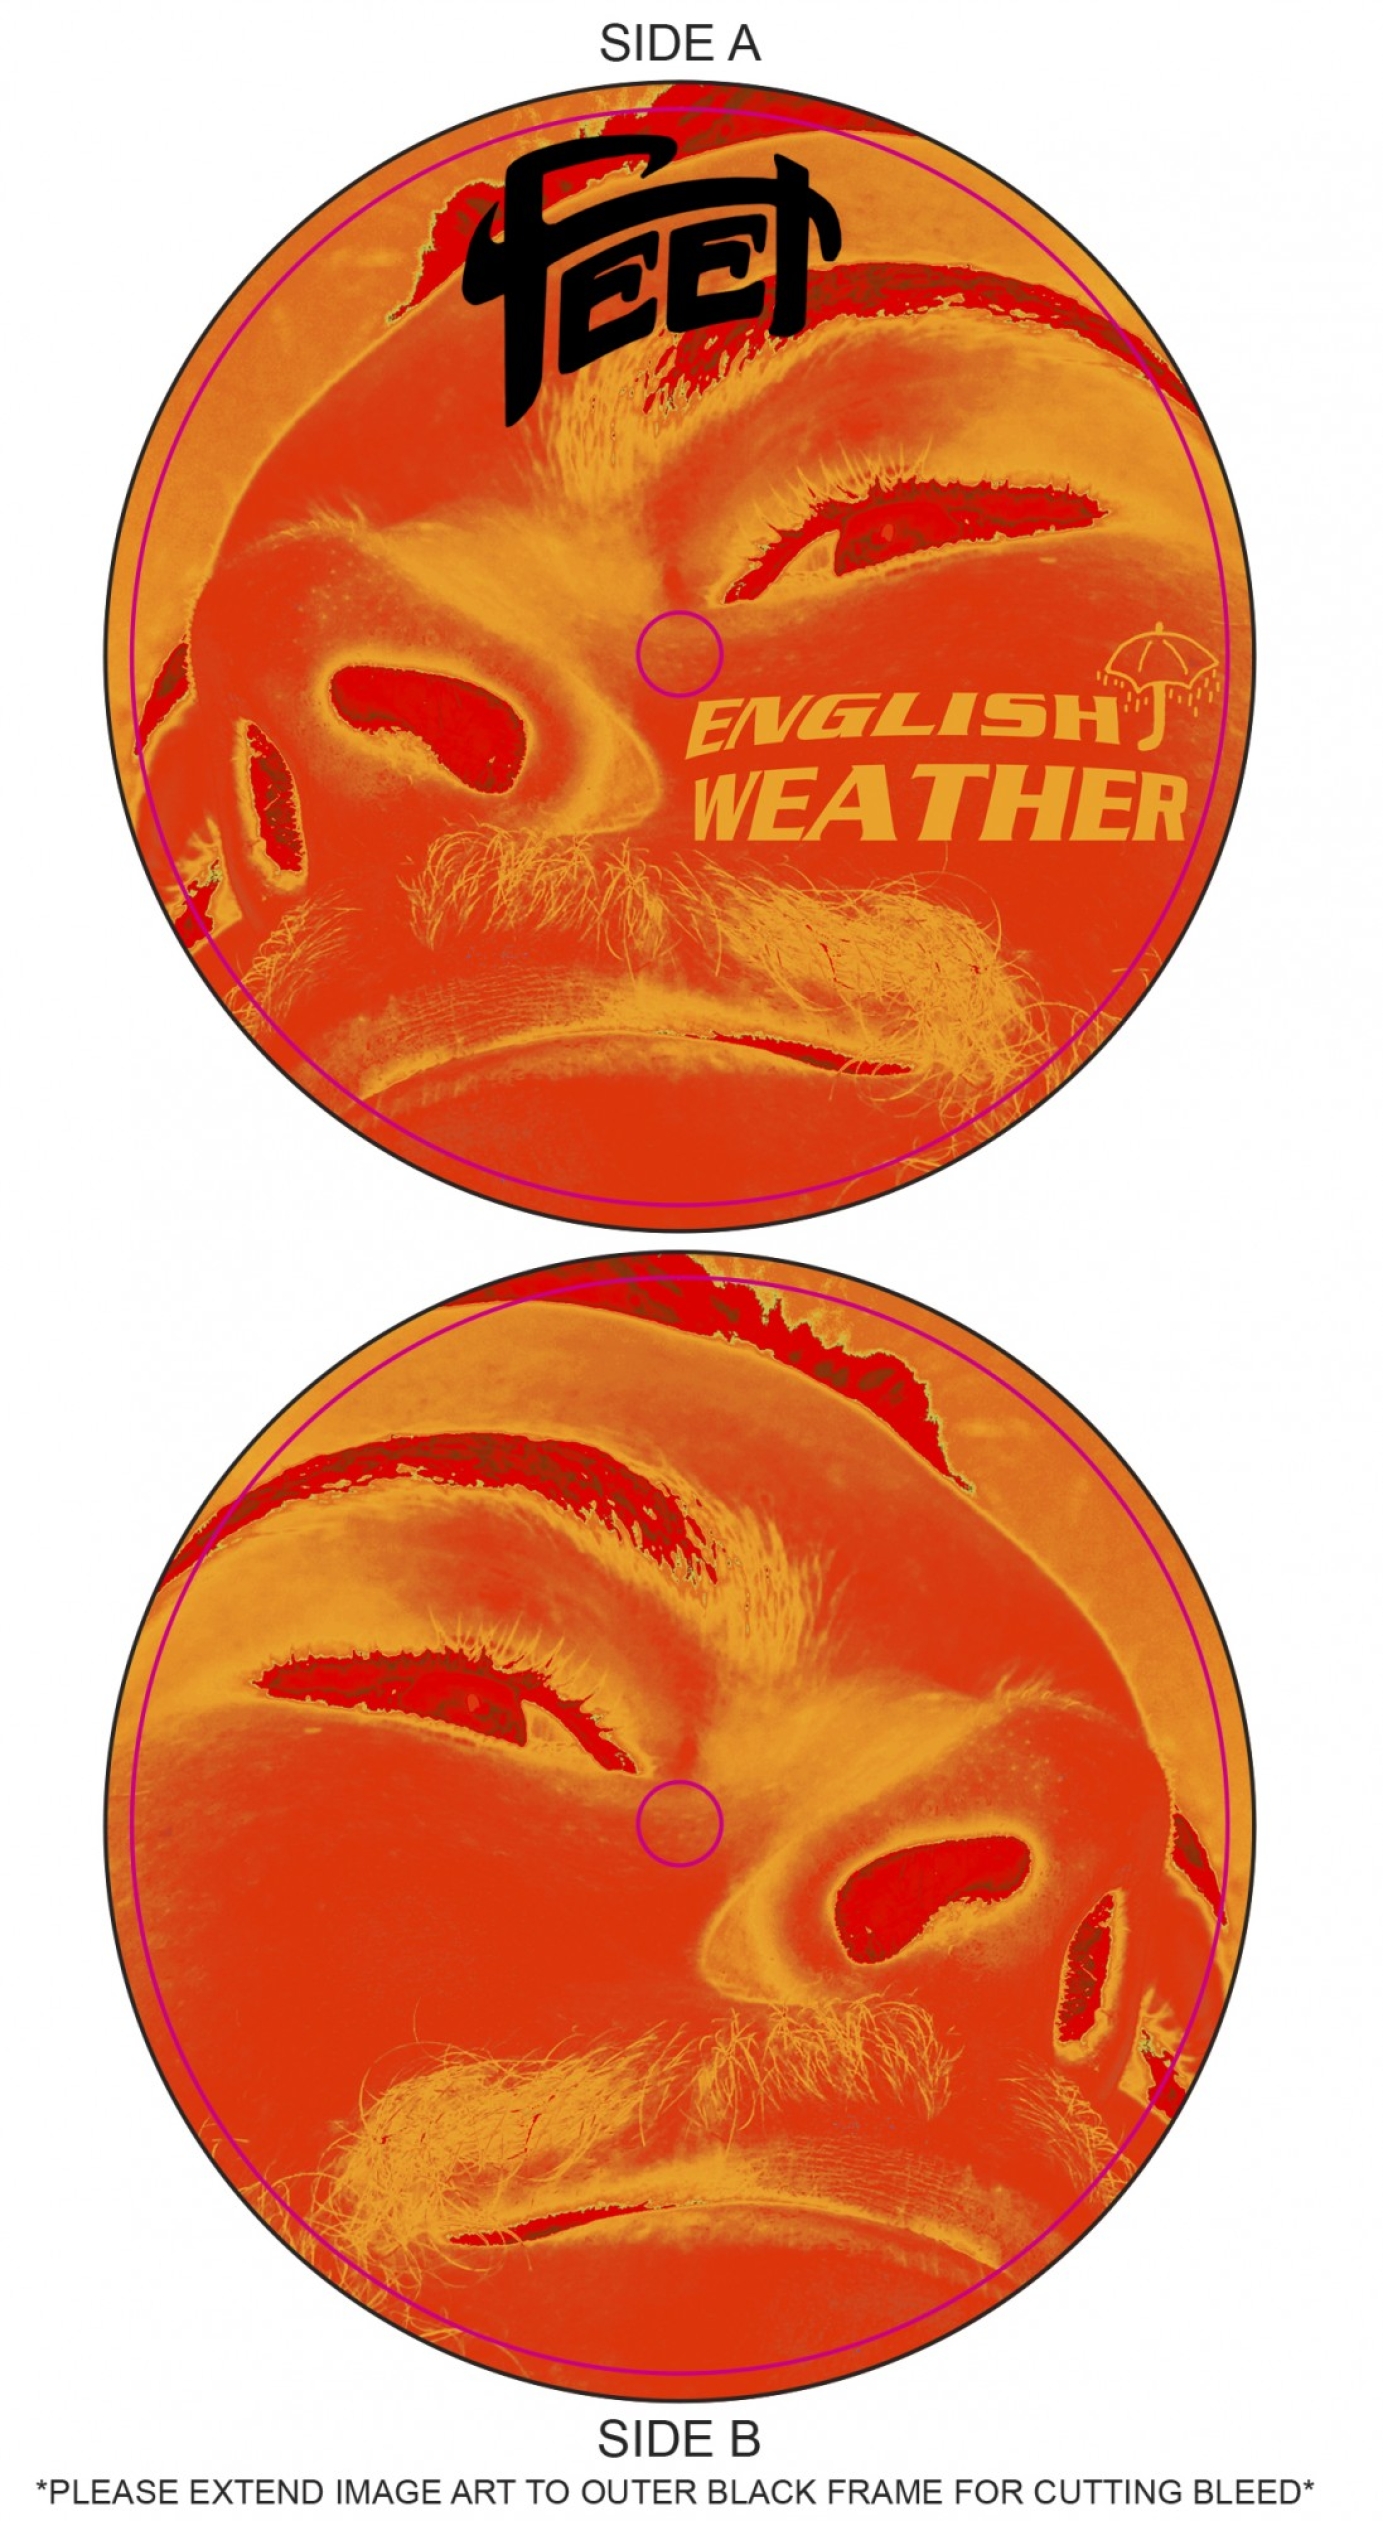 English Weather Single Cover Art and Picture Disk Design